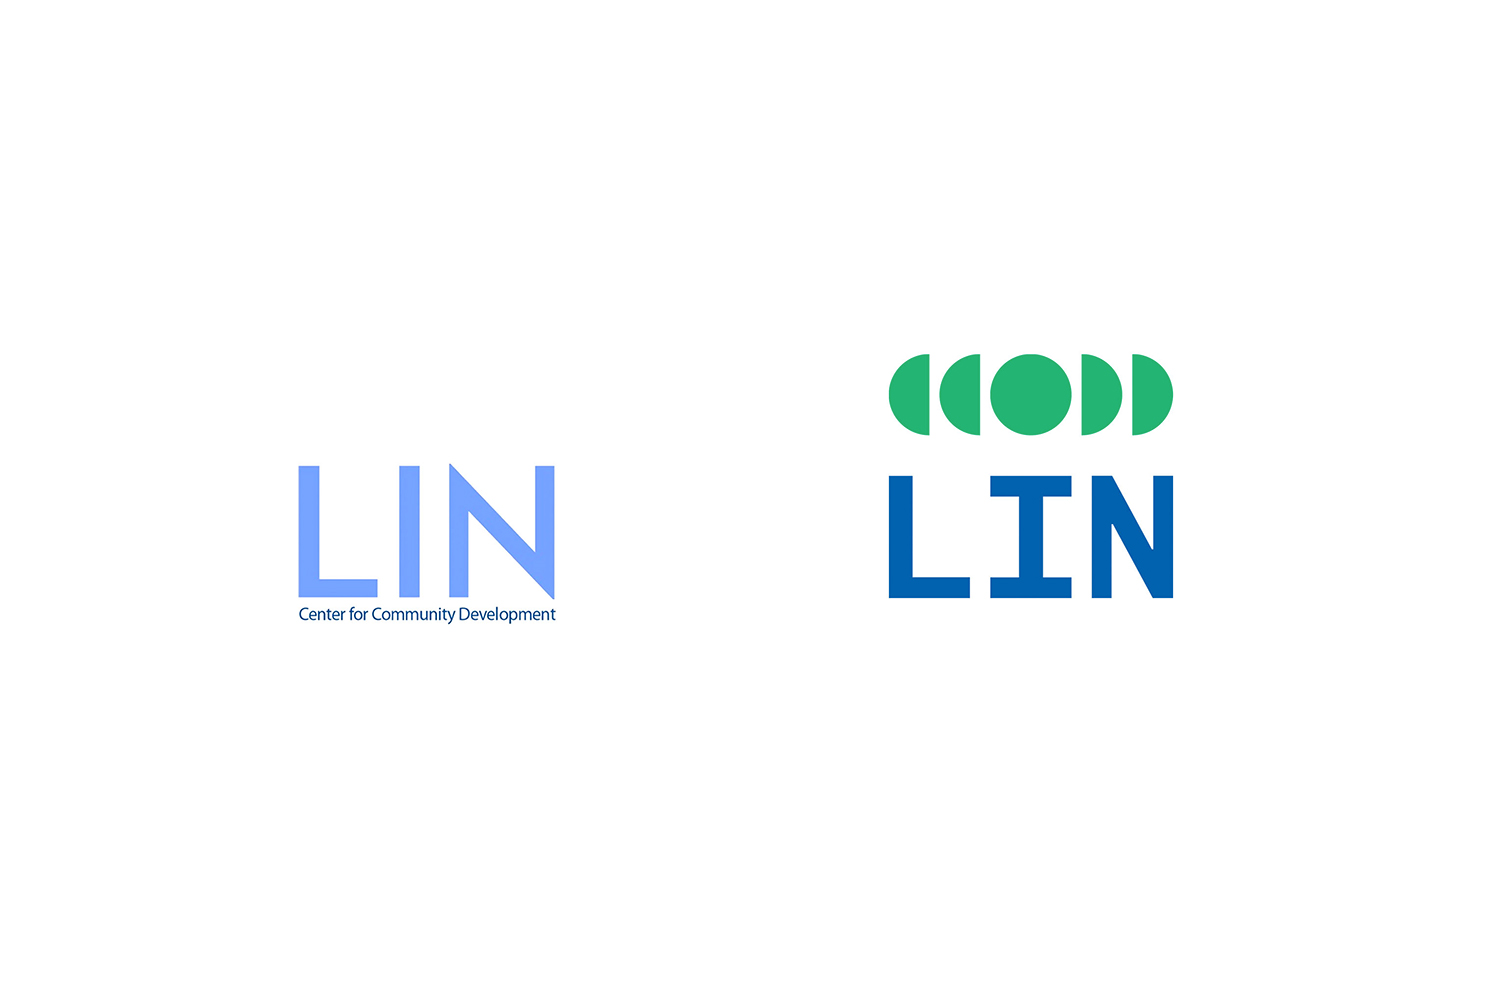 LIN old and new logo comparision